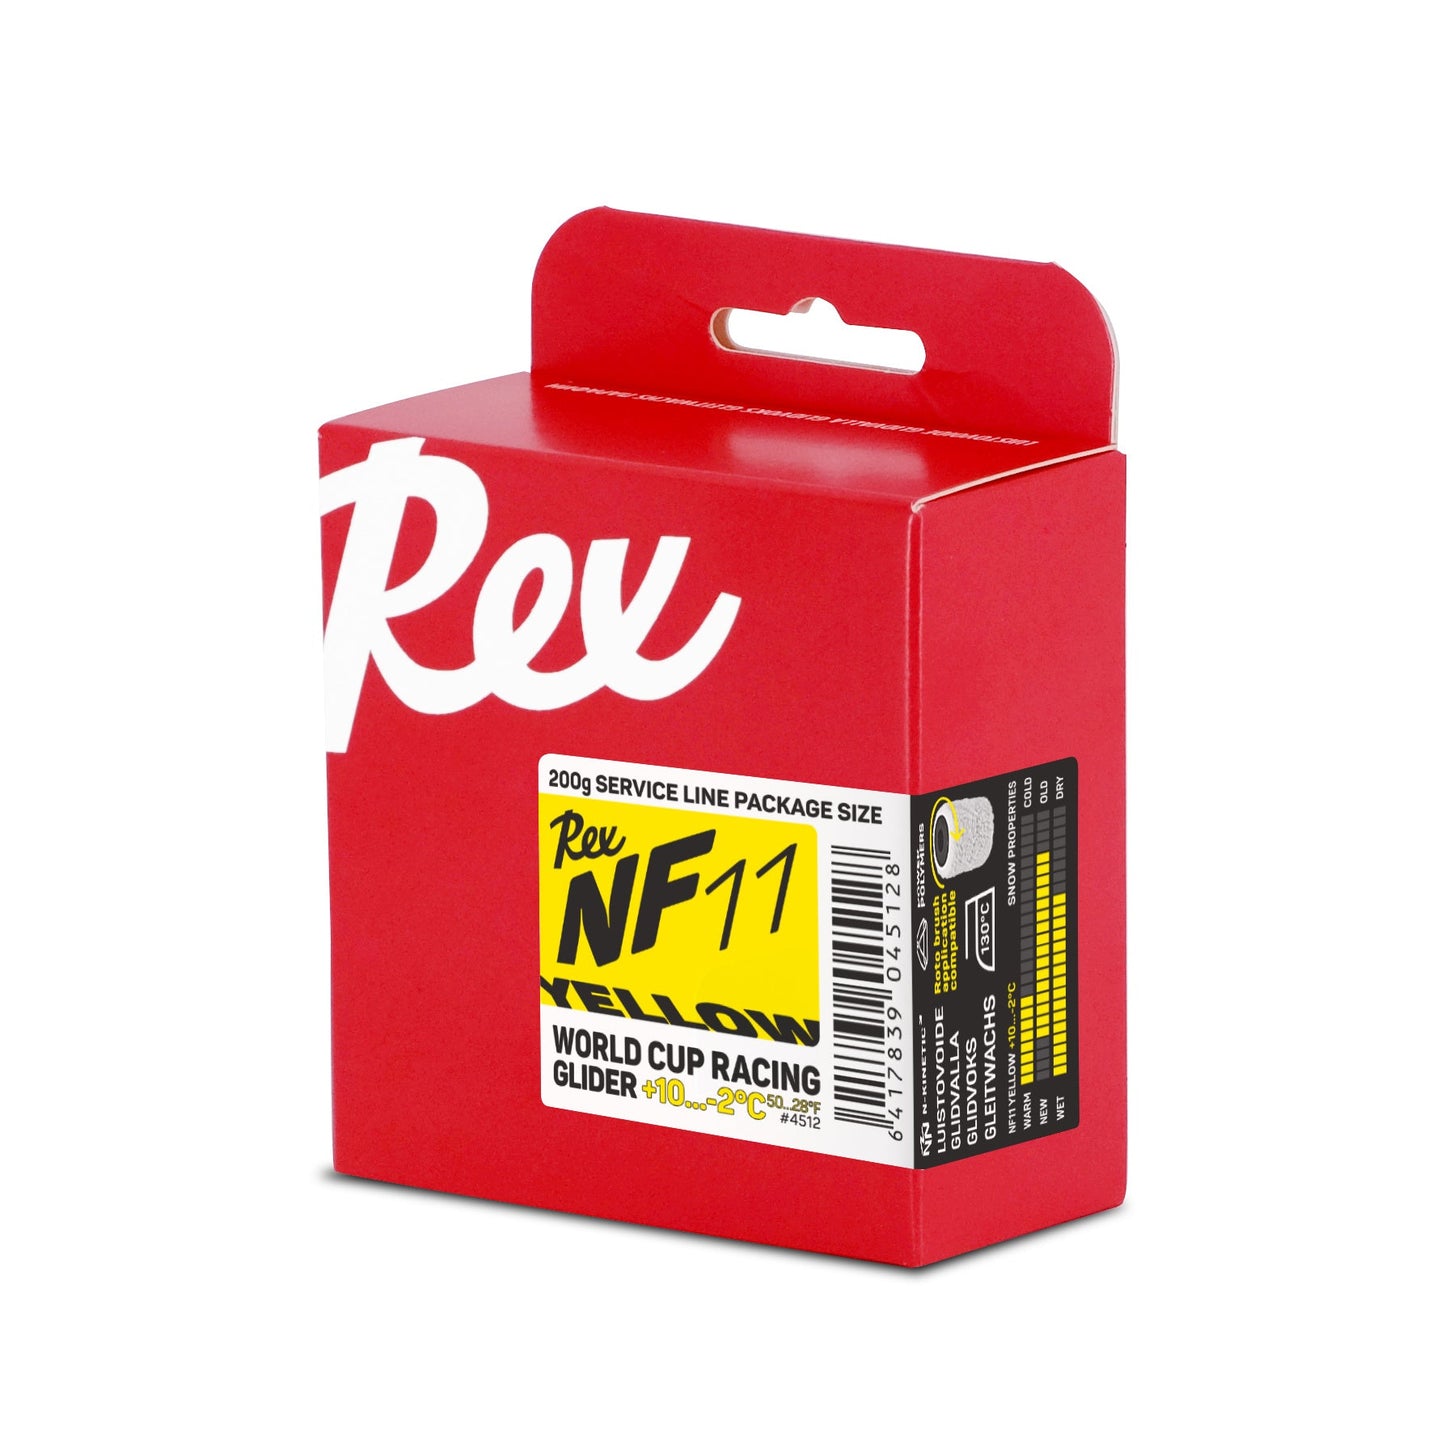 A product picture of the Rex Wax NF11 Yellow Block Glider